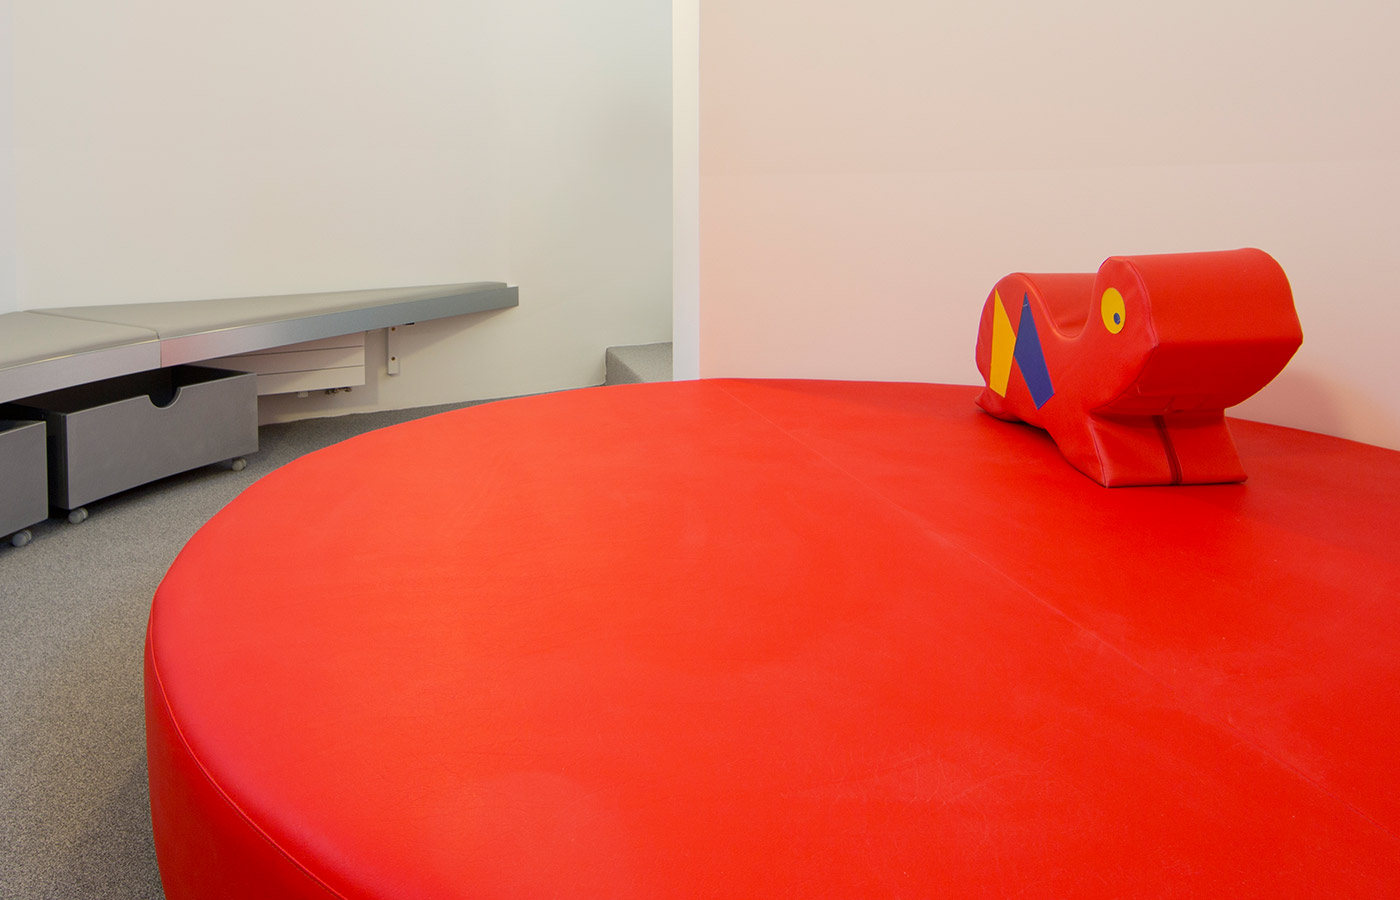 A room with a large red round padded rest area.